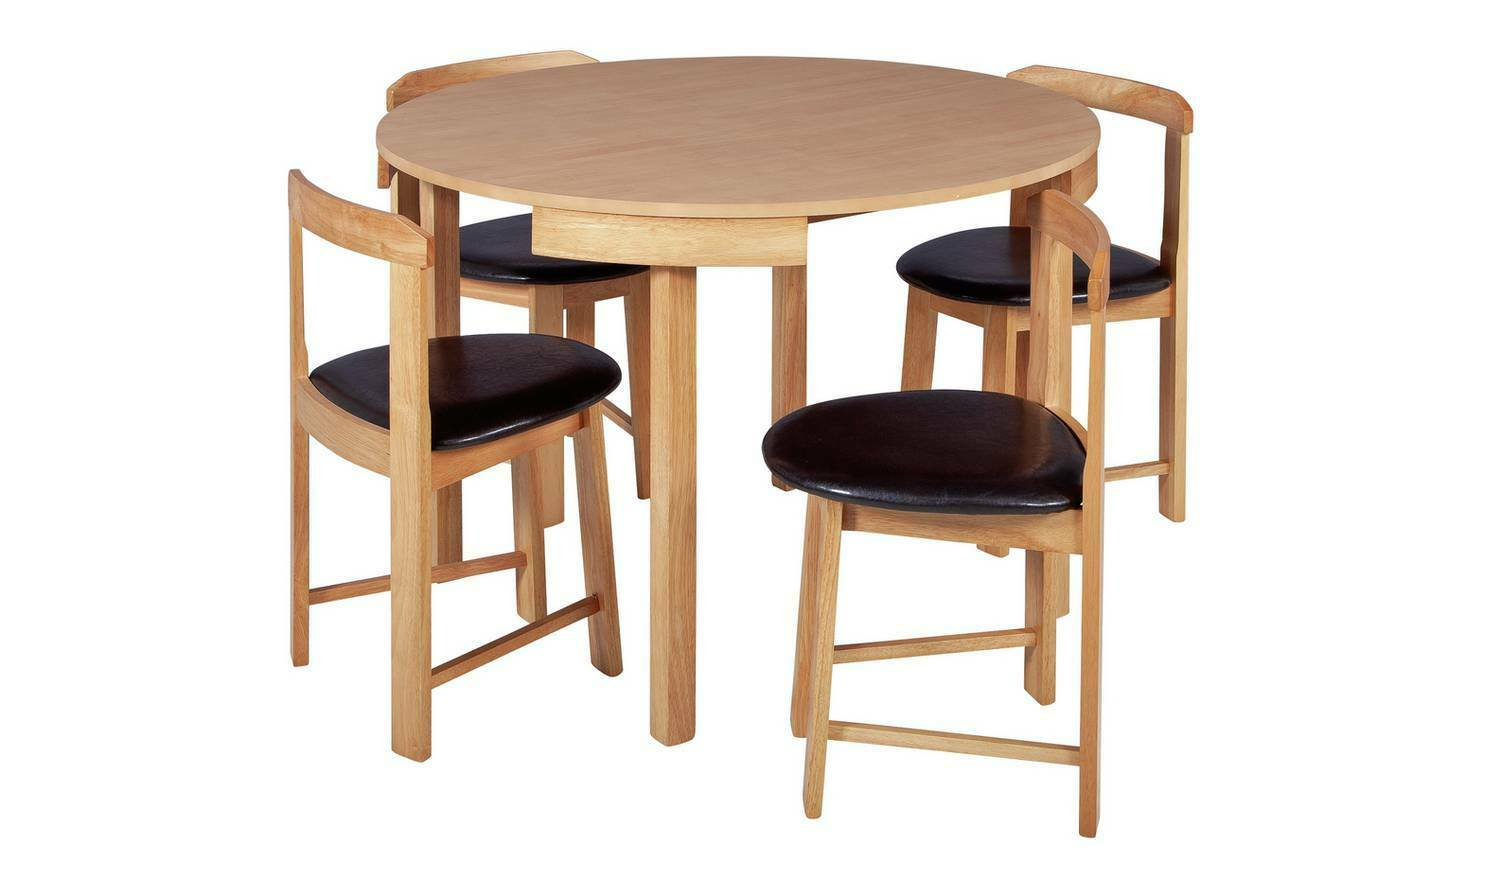 Hygena Alena Oak Circular Dining Table And 4 Chairs in dimensions 1500 X 880